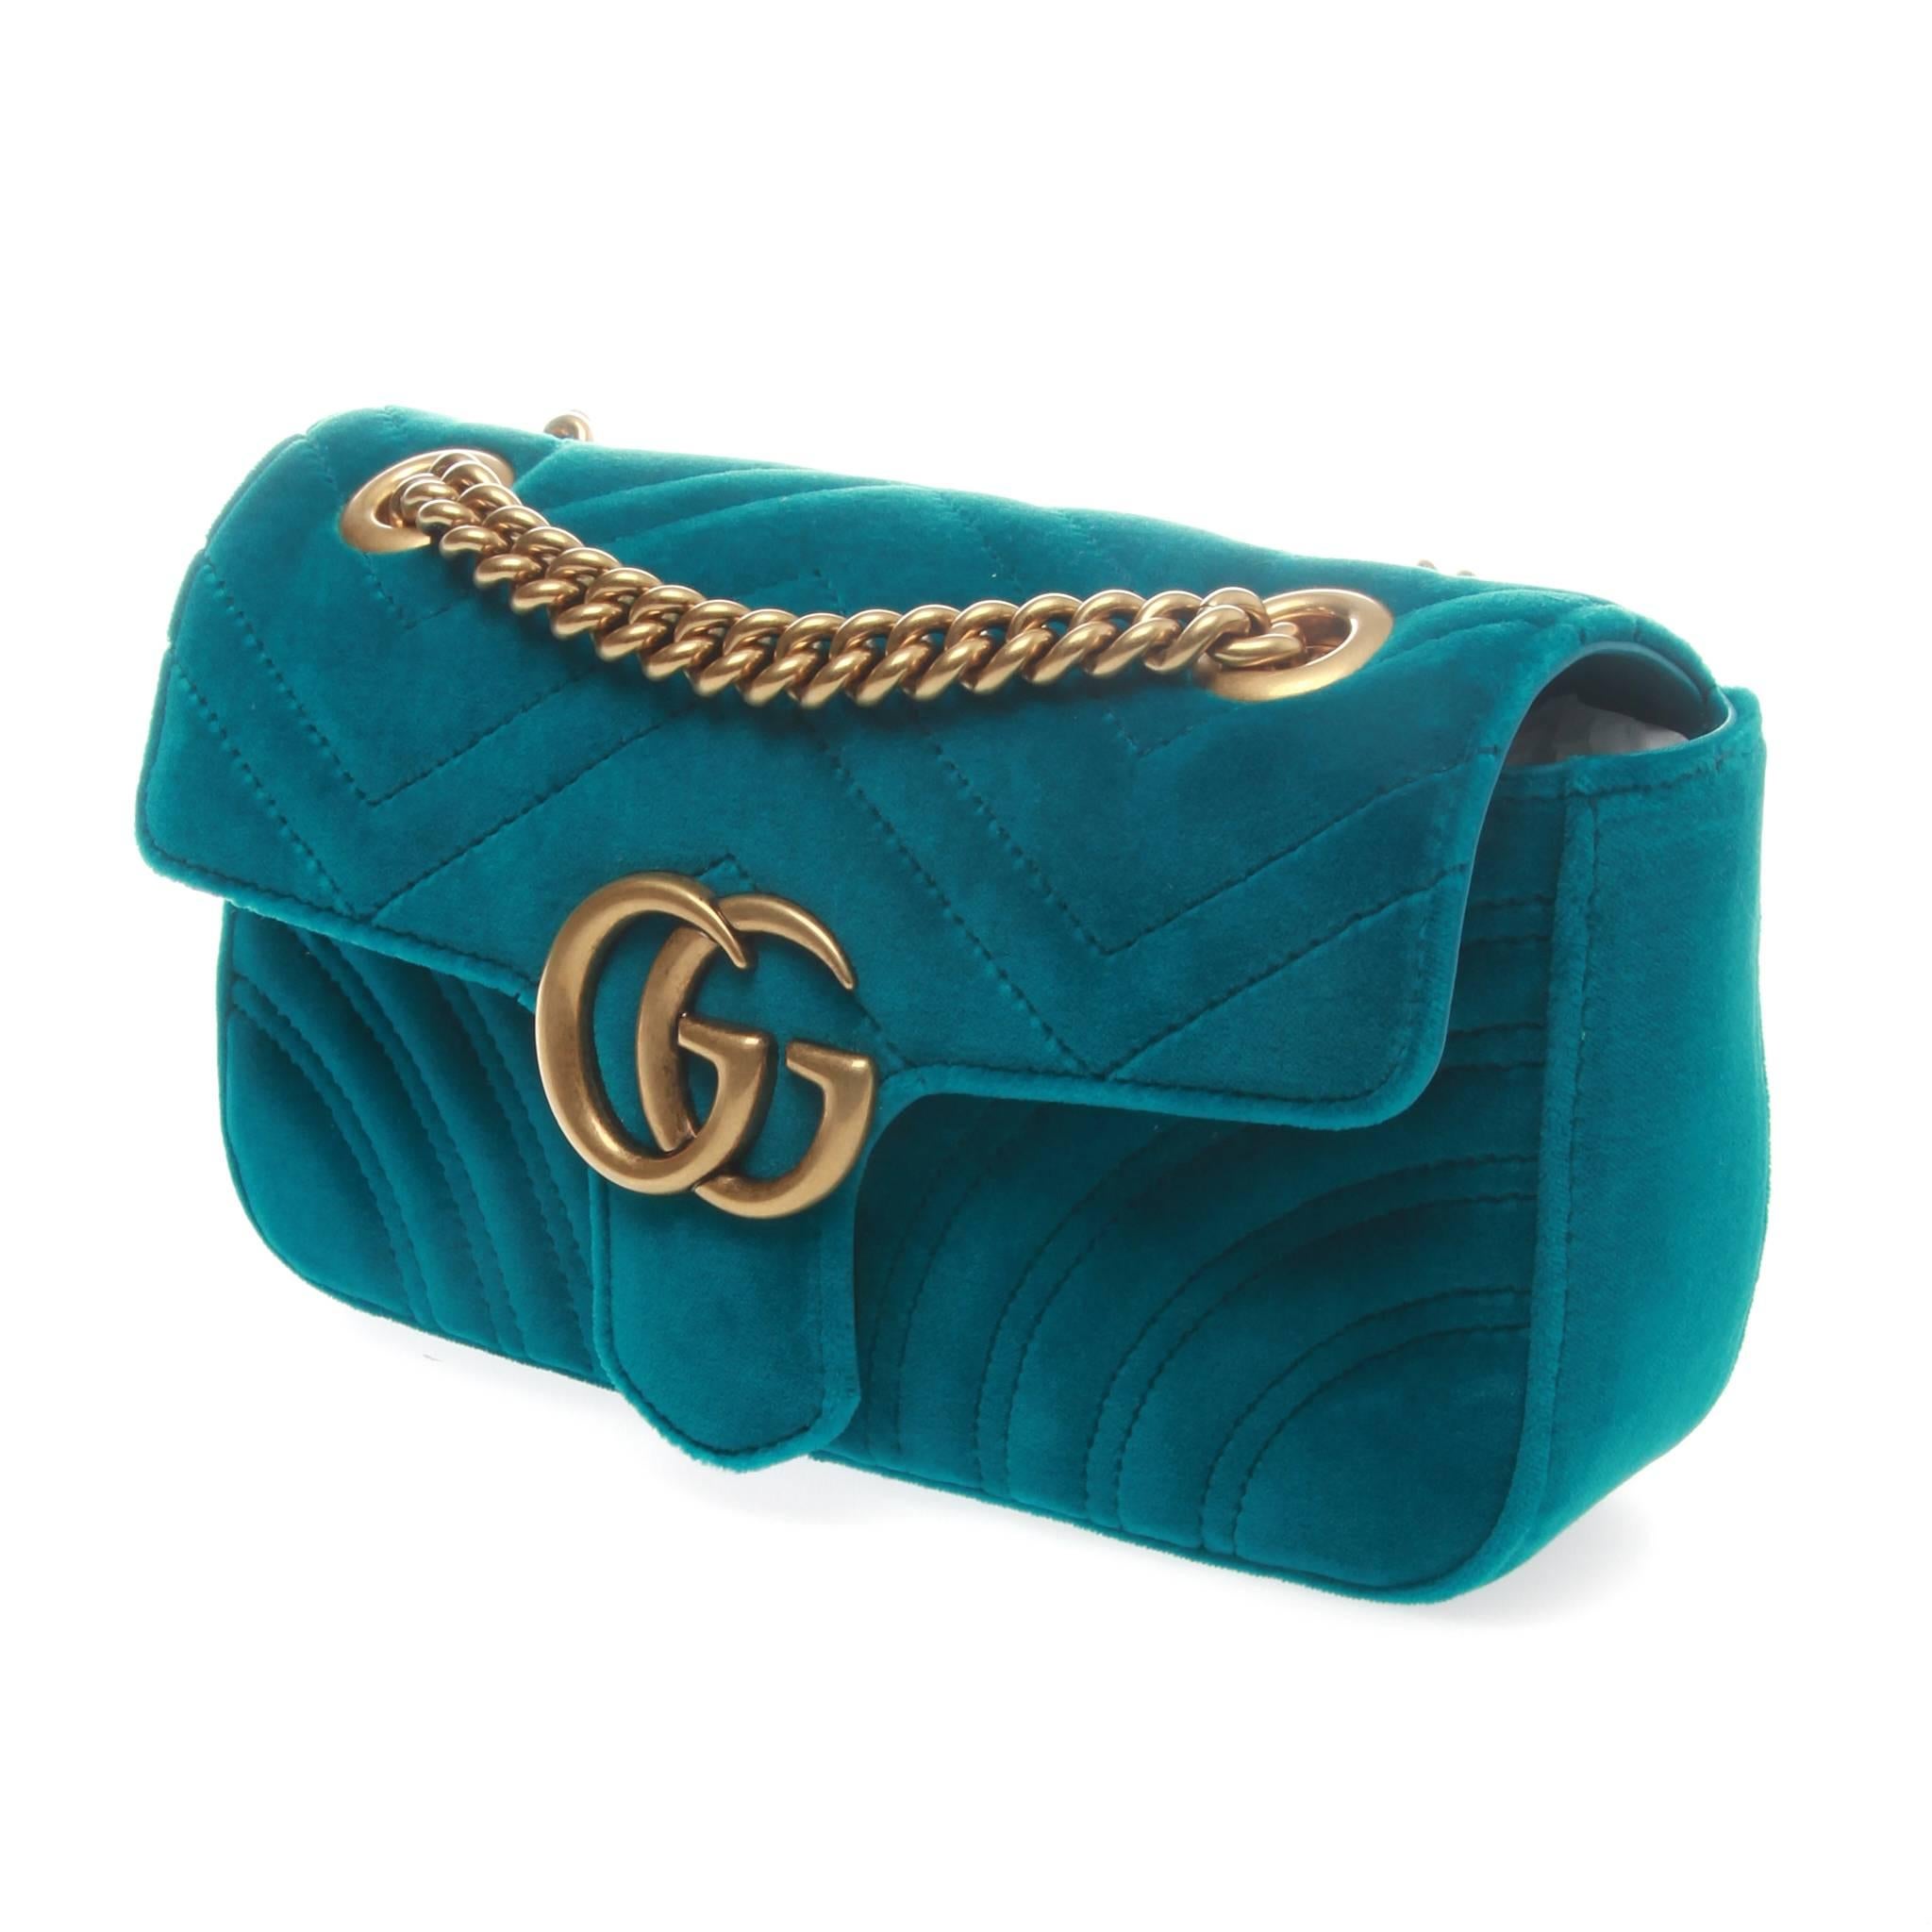 Gucci GG Marmont Petrol Blue Chevron Velvet Shoulder Bag

The small GG Marmont chain shoulder bag has a softly structured shape and an oversized flap closure with Double G hardware.The sliding chain strap can be worn multiple ways, changing between